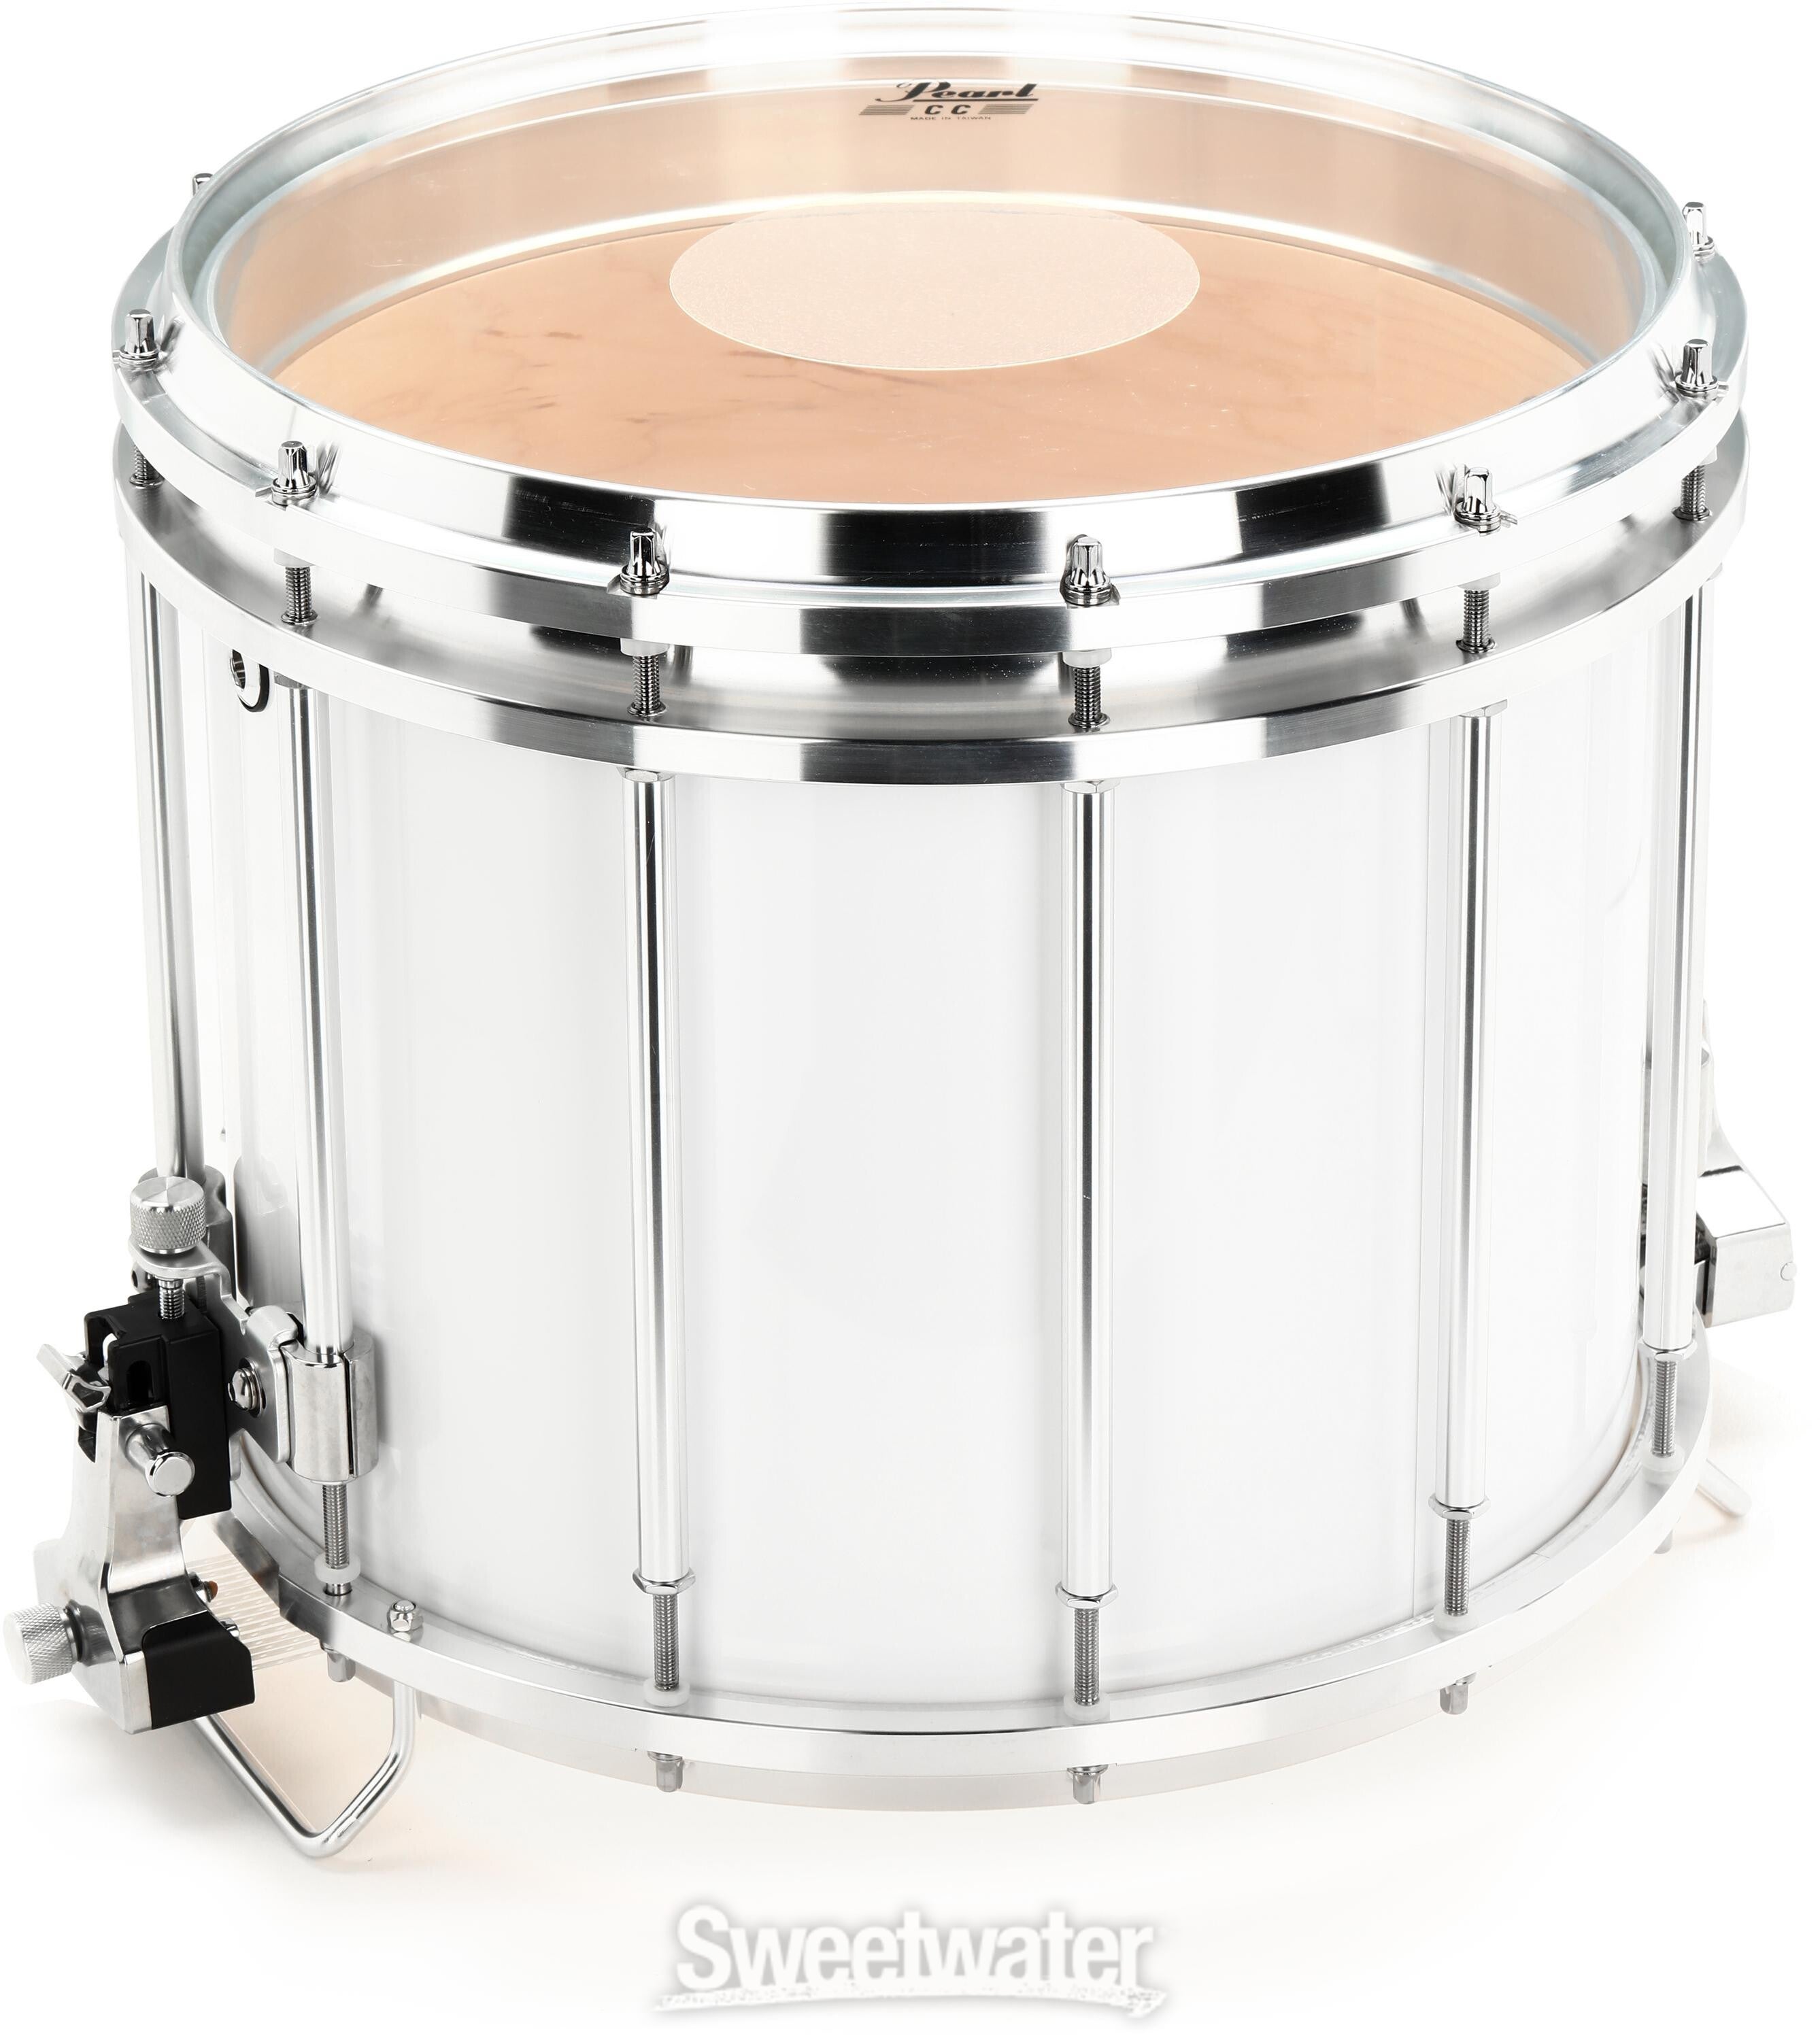 Pearl Championship Maple FFX Marching Snare Drum - 14 x 12 inch